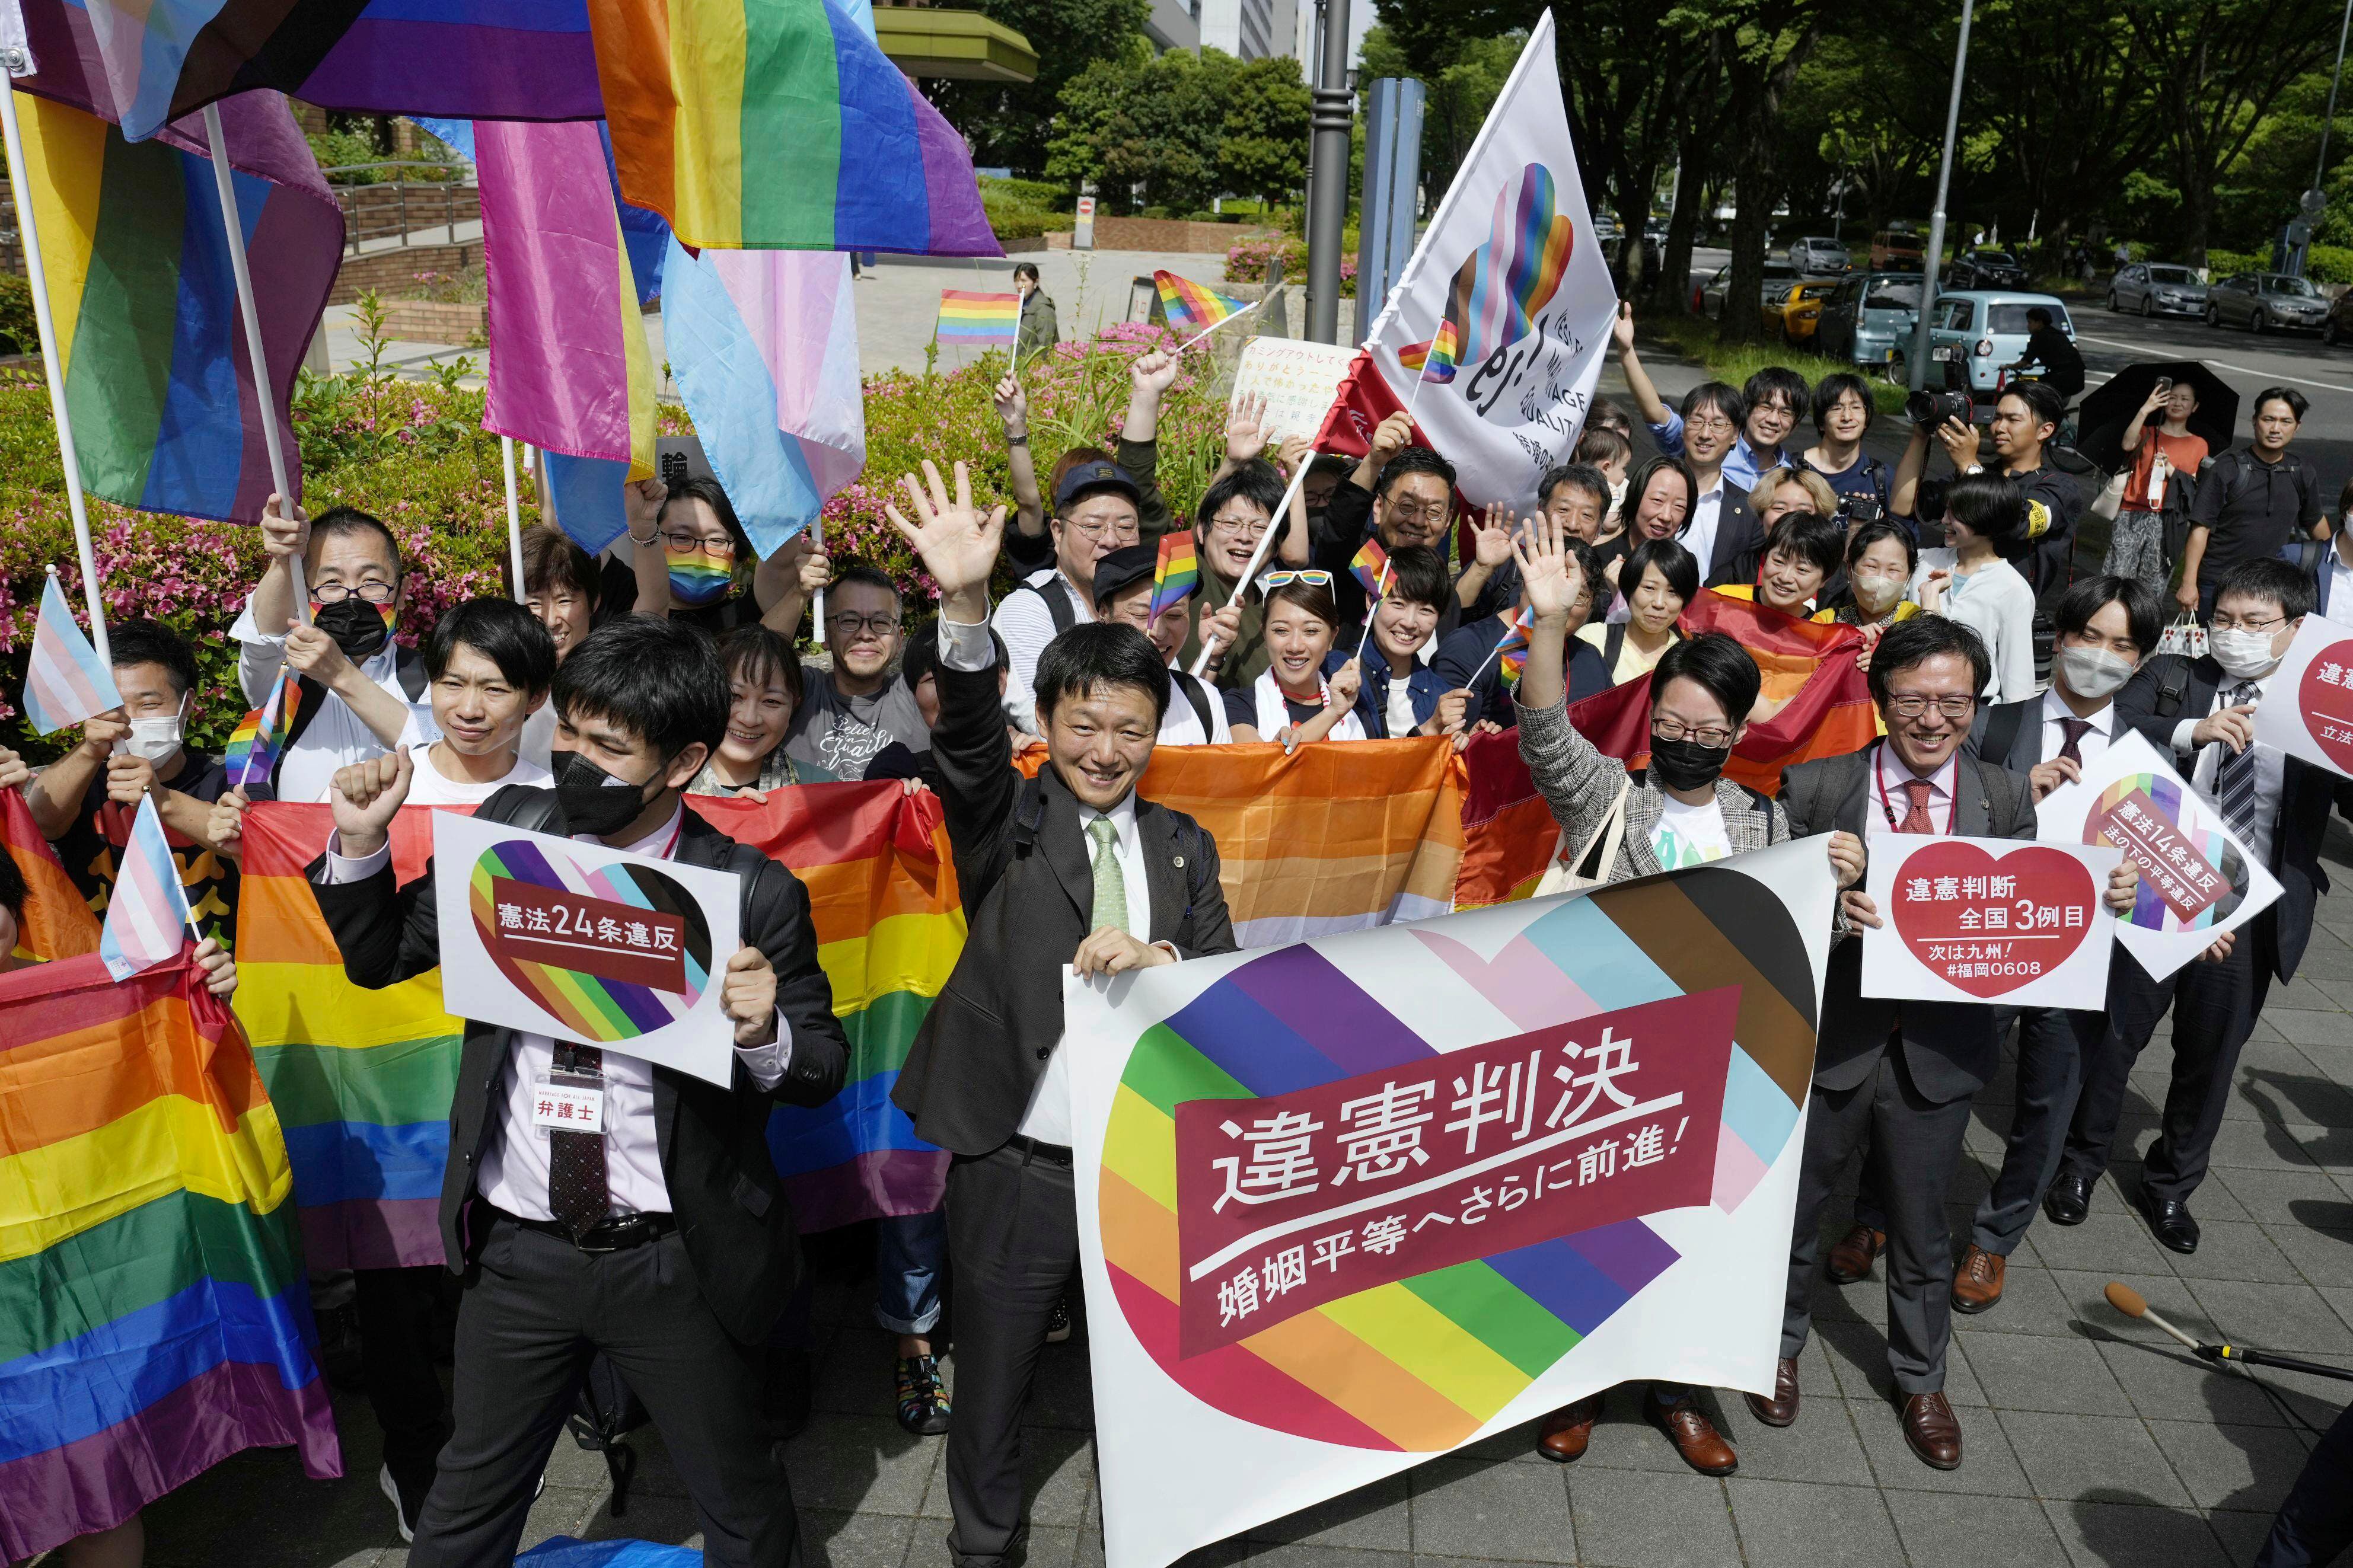 Japanese court says not recognising same-sex marriage is ‘unconstitutional’ in boost for campaigners